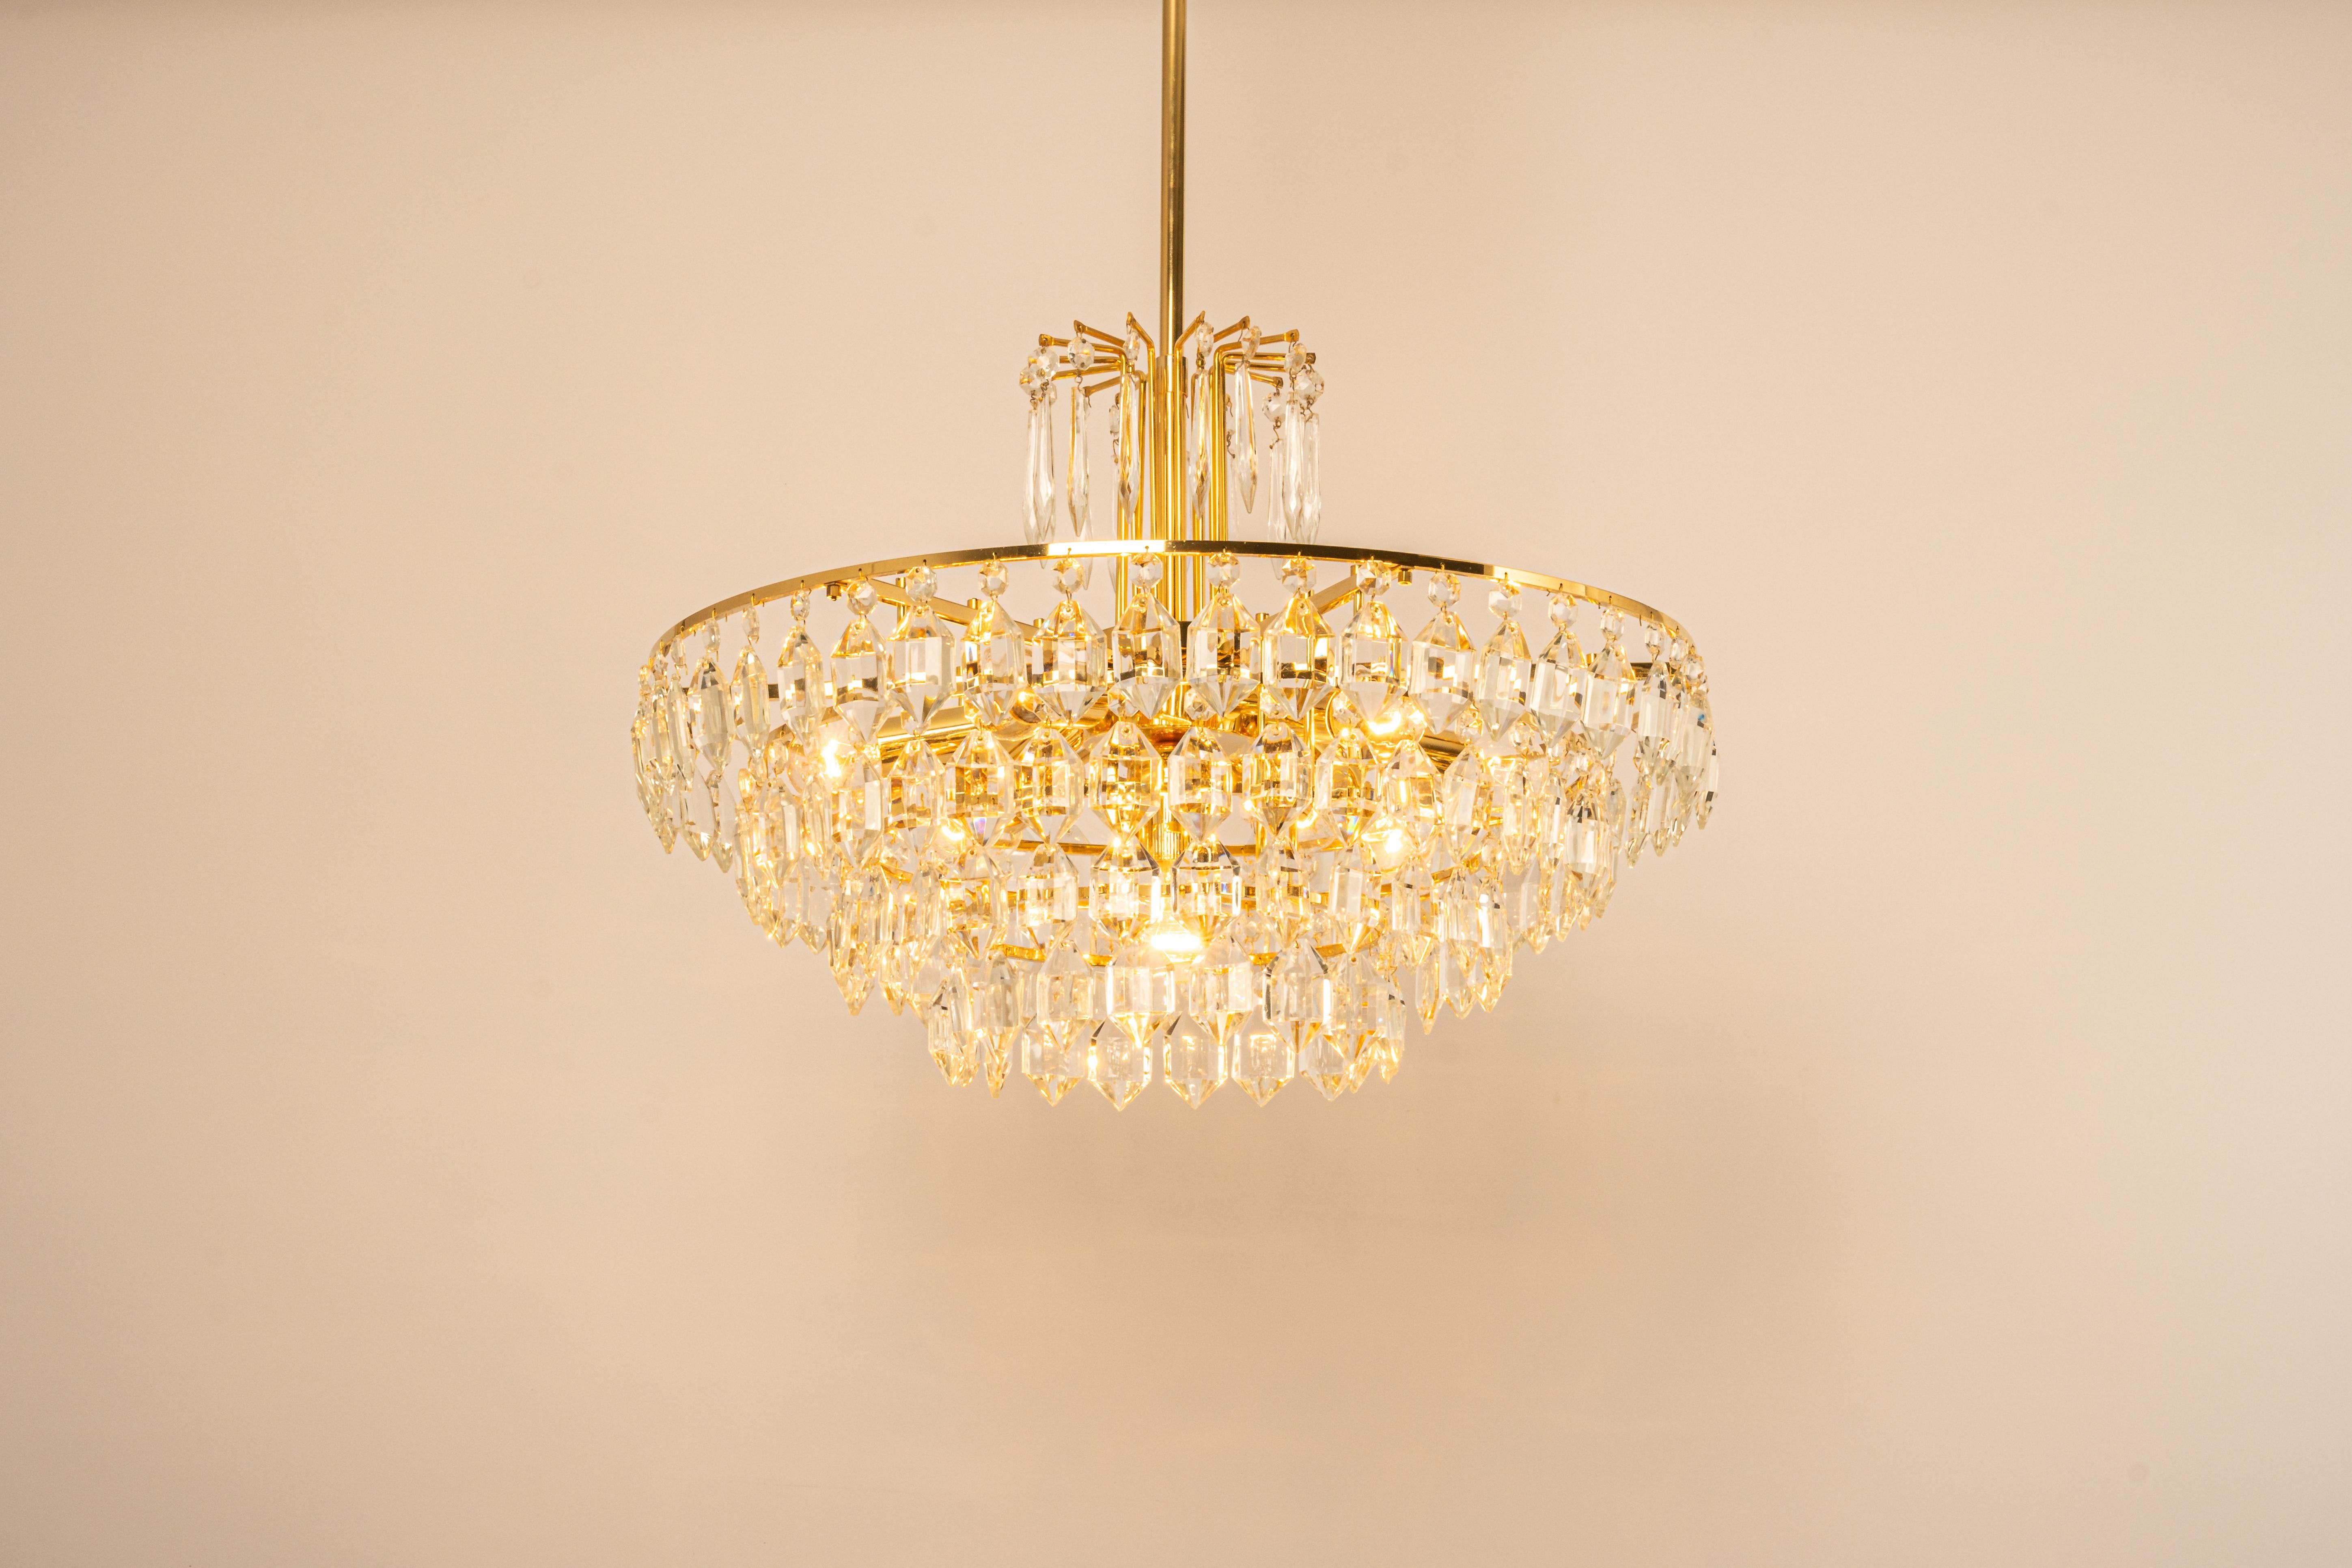 1 of 2 Bakalowits Chandelier, Brass and Crystal Glass, Austria, 1960s For Sale 2